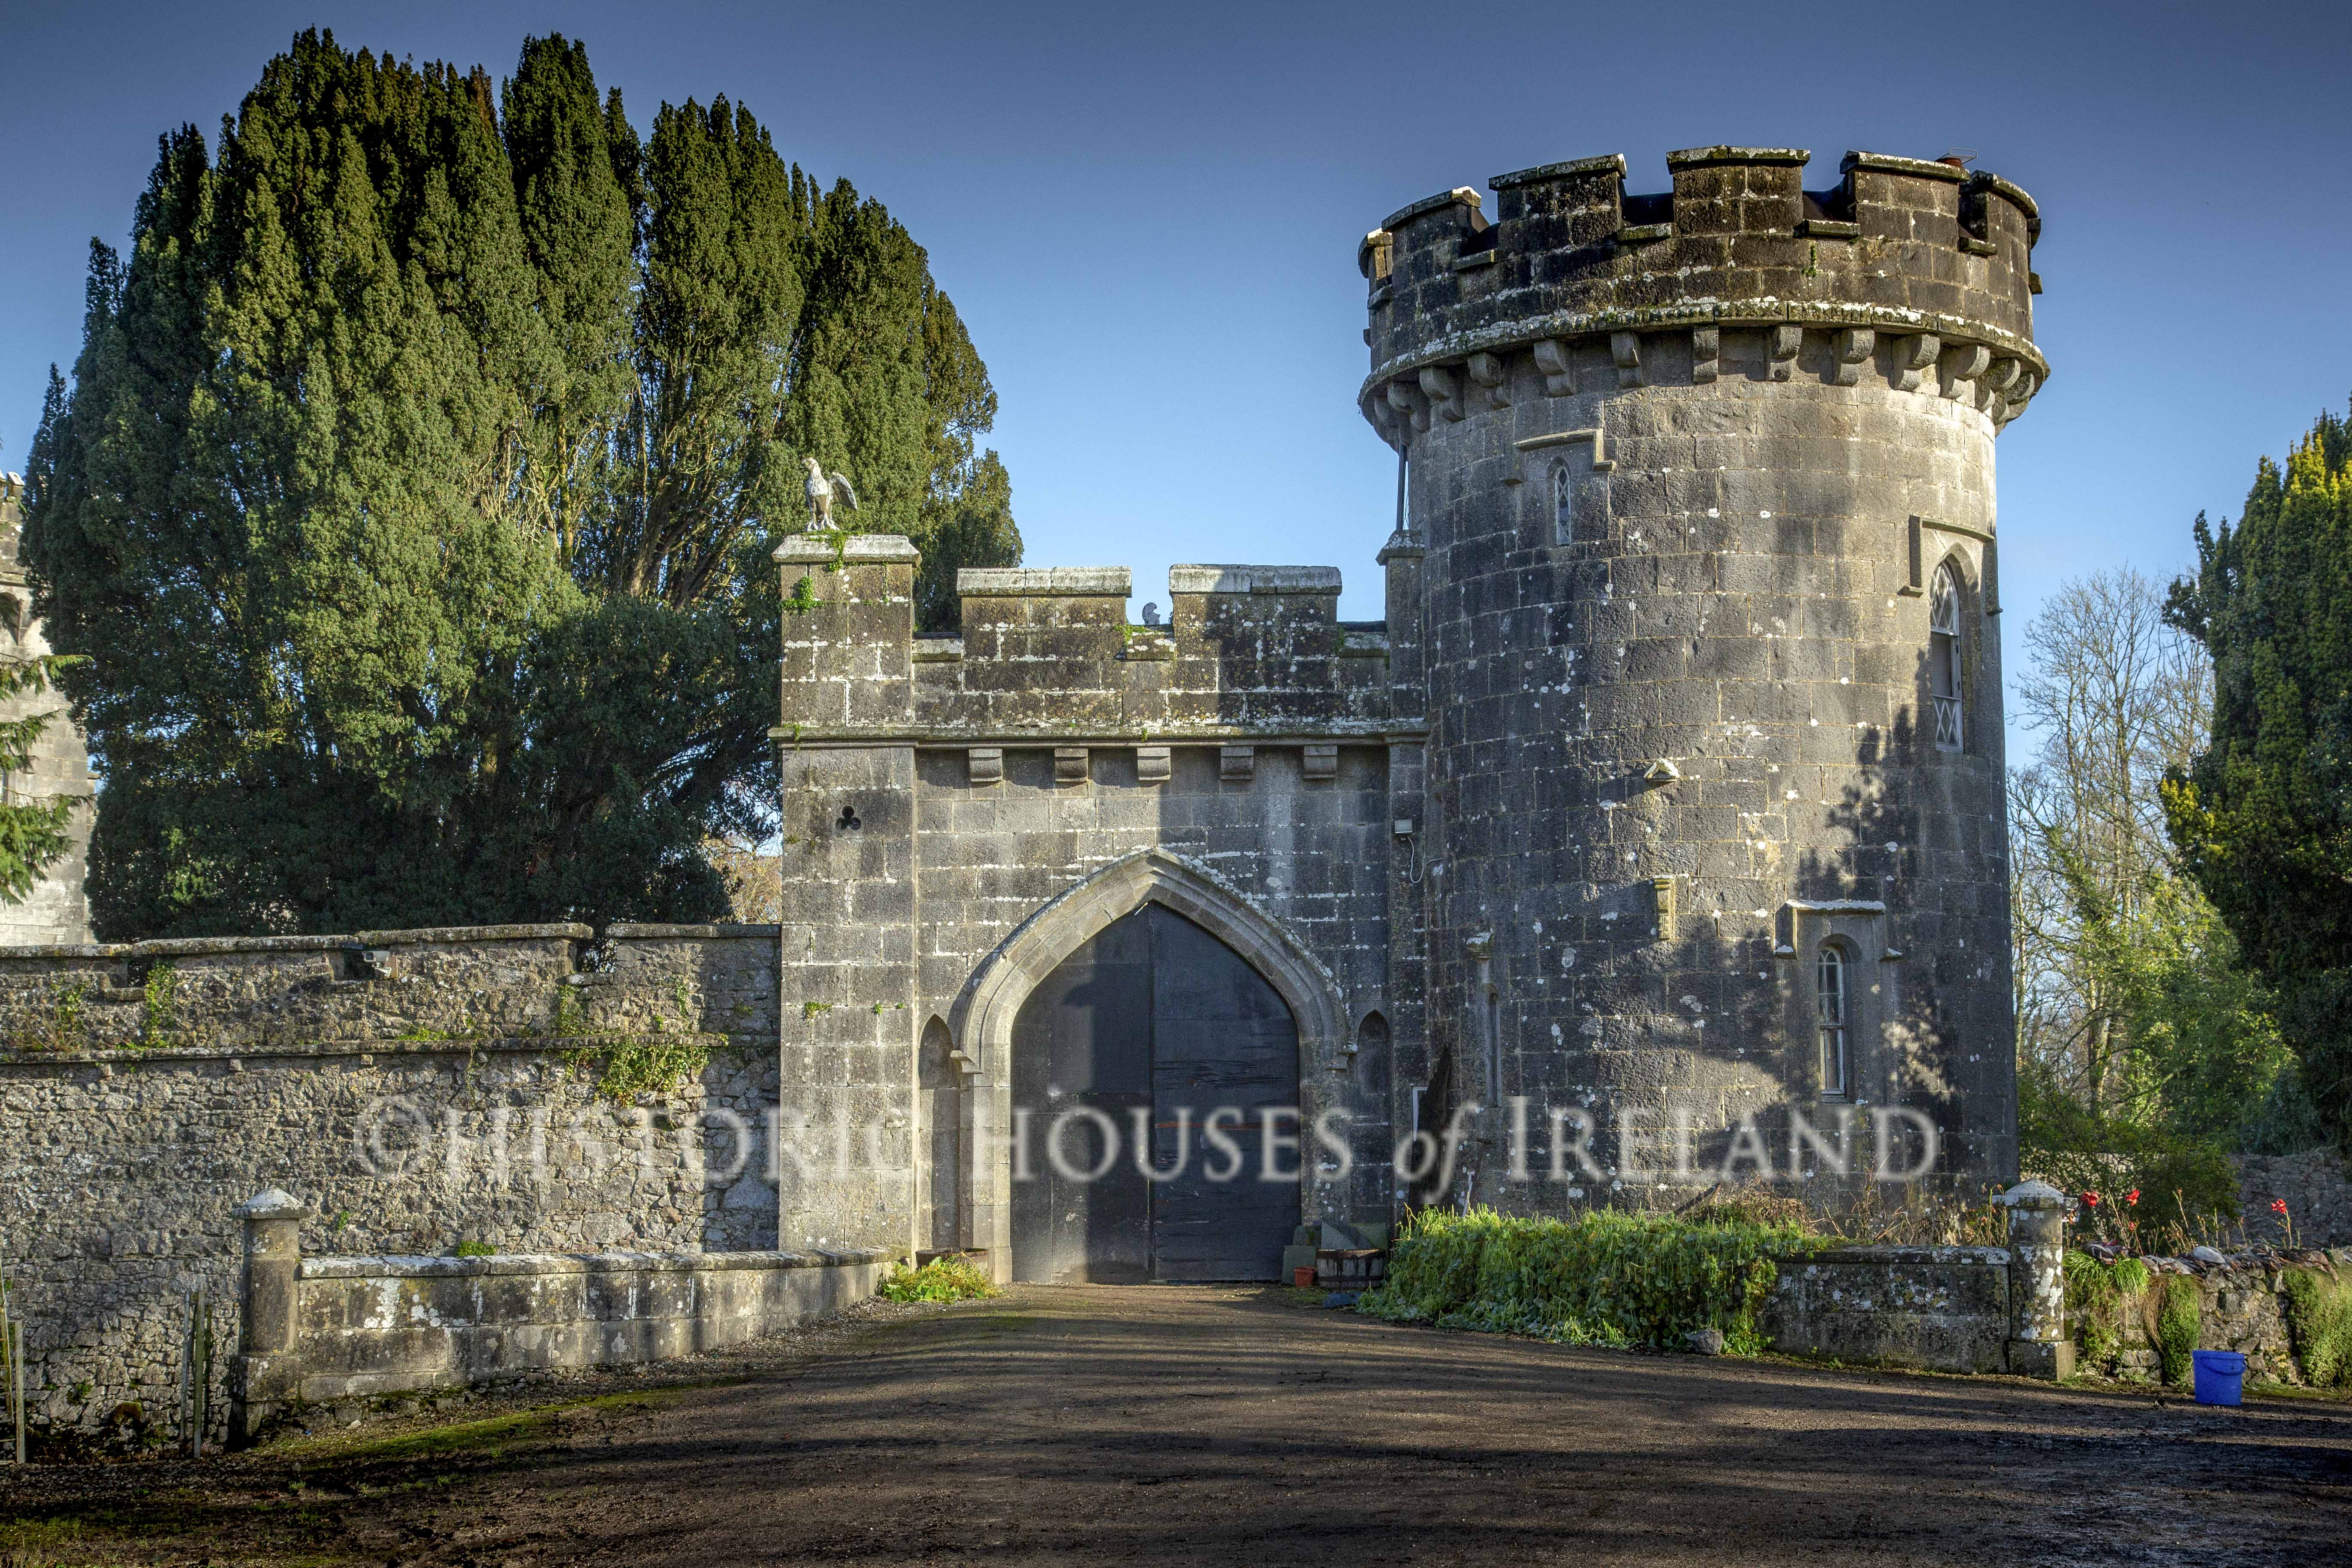 The gatehouse at Castlegarde, County Limerick